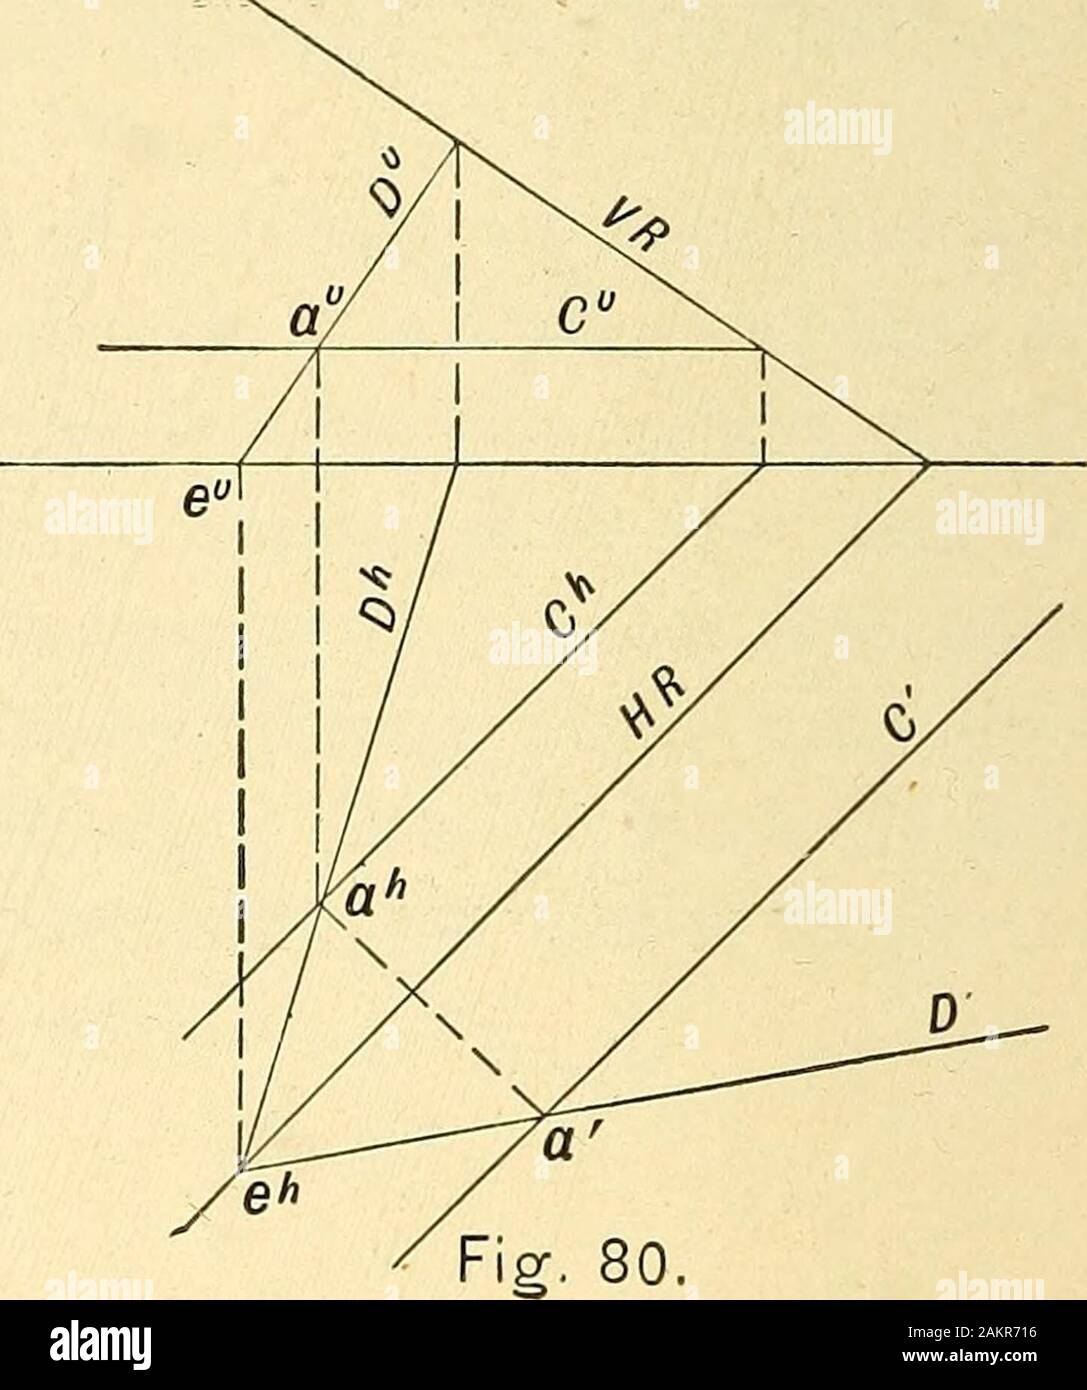 Descriptive geometry . ion when the plane shallhave been revolved about either of its tracesas an axis to coincide with a coordinate plane. Principle. This is identical with the prin-ciple of Art. 38, page 25, since either trace ofthe plane is an axis lying in a coordinate plane,one projection of which is the line itself, andthe other projection of which is in the groundline. Method. See Art. 38, page 25. Construction. Fig. 79. ffiVandFiVarethe traces of the given plane and 5 and 5% theprojections of the point. If the plane withpoint h thereon be revolved into H about HNas an axis, the point w Stock Photo